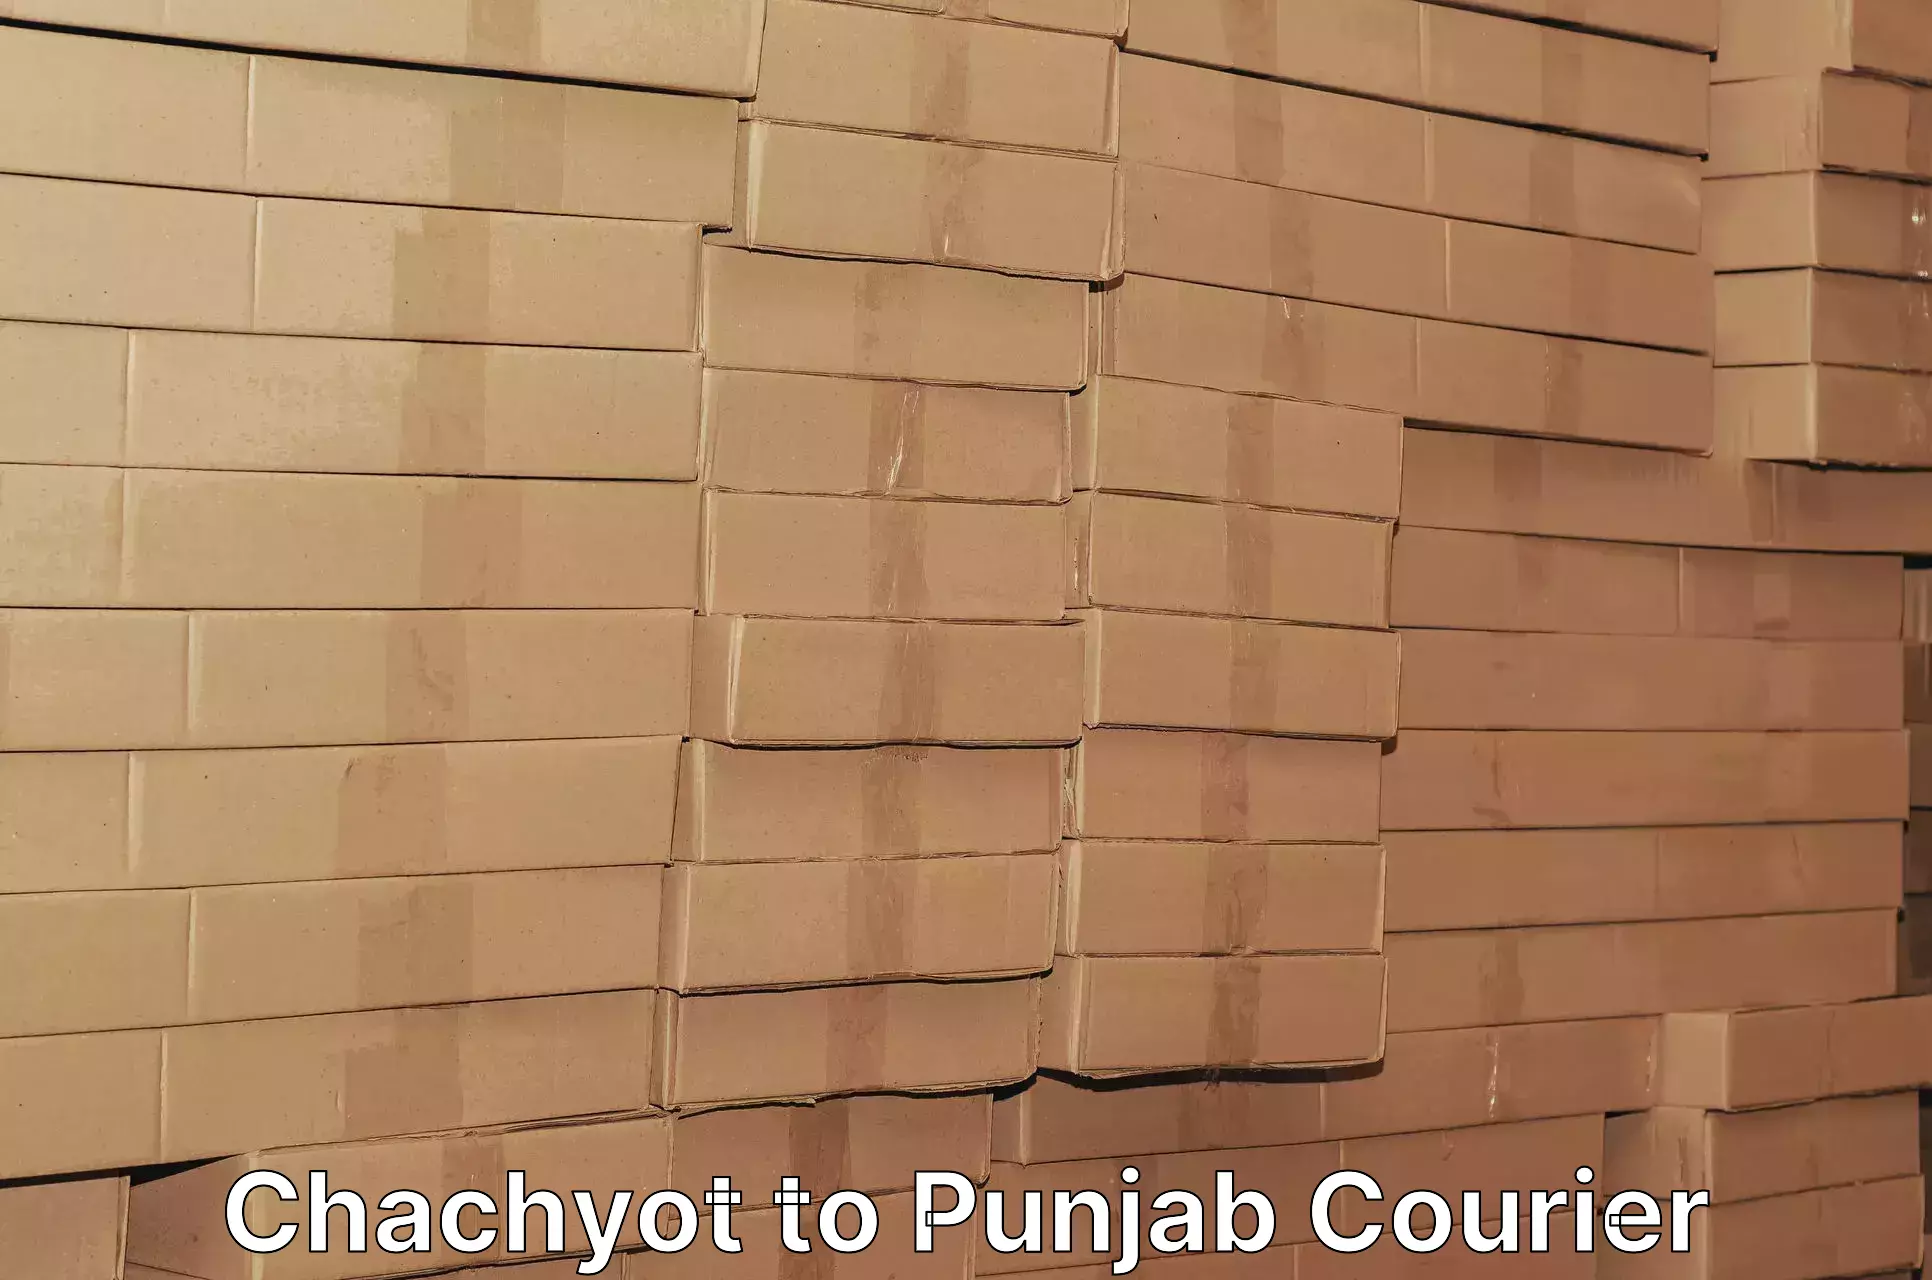 Courier service innovation Chachyot to Fatehgarh Sahib